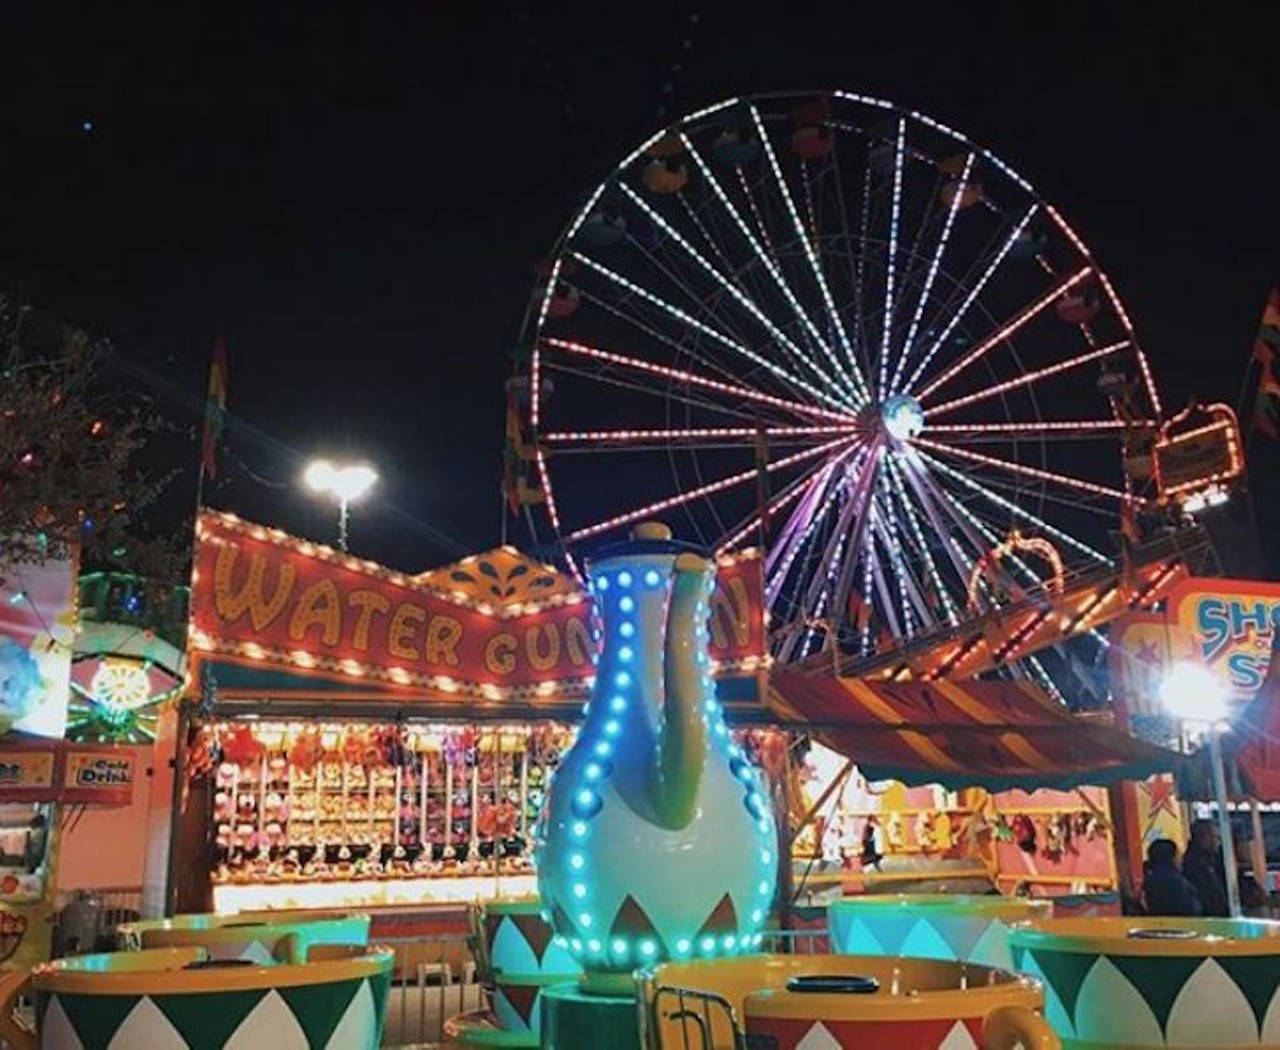 Santa&#146;s Winter Wonderland Village  
413 N. Alafaya Trail
Dec. 7-Jan. 6 2019
It&#146;s not officially Christmas until you take the family to the carnival. Bask in all of the holiday food, amusement park rides, and Christmas lights the village has to offer.
Photo via Orlando Weekly